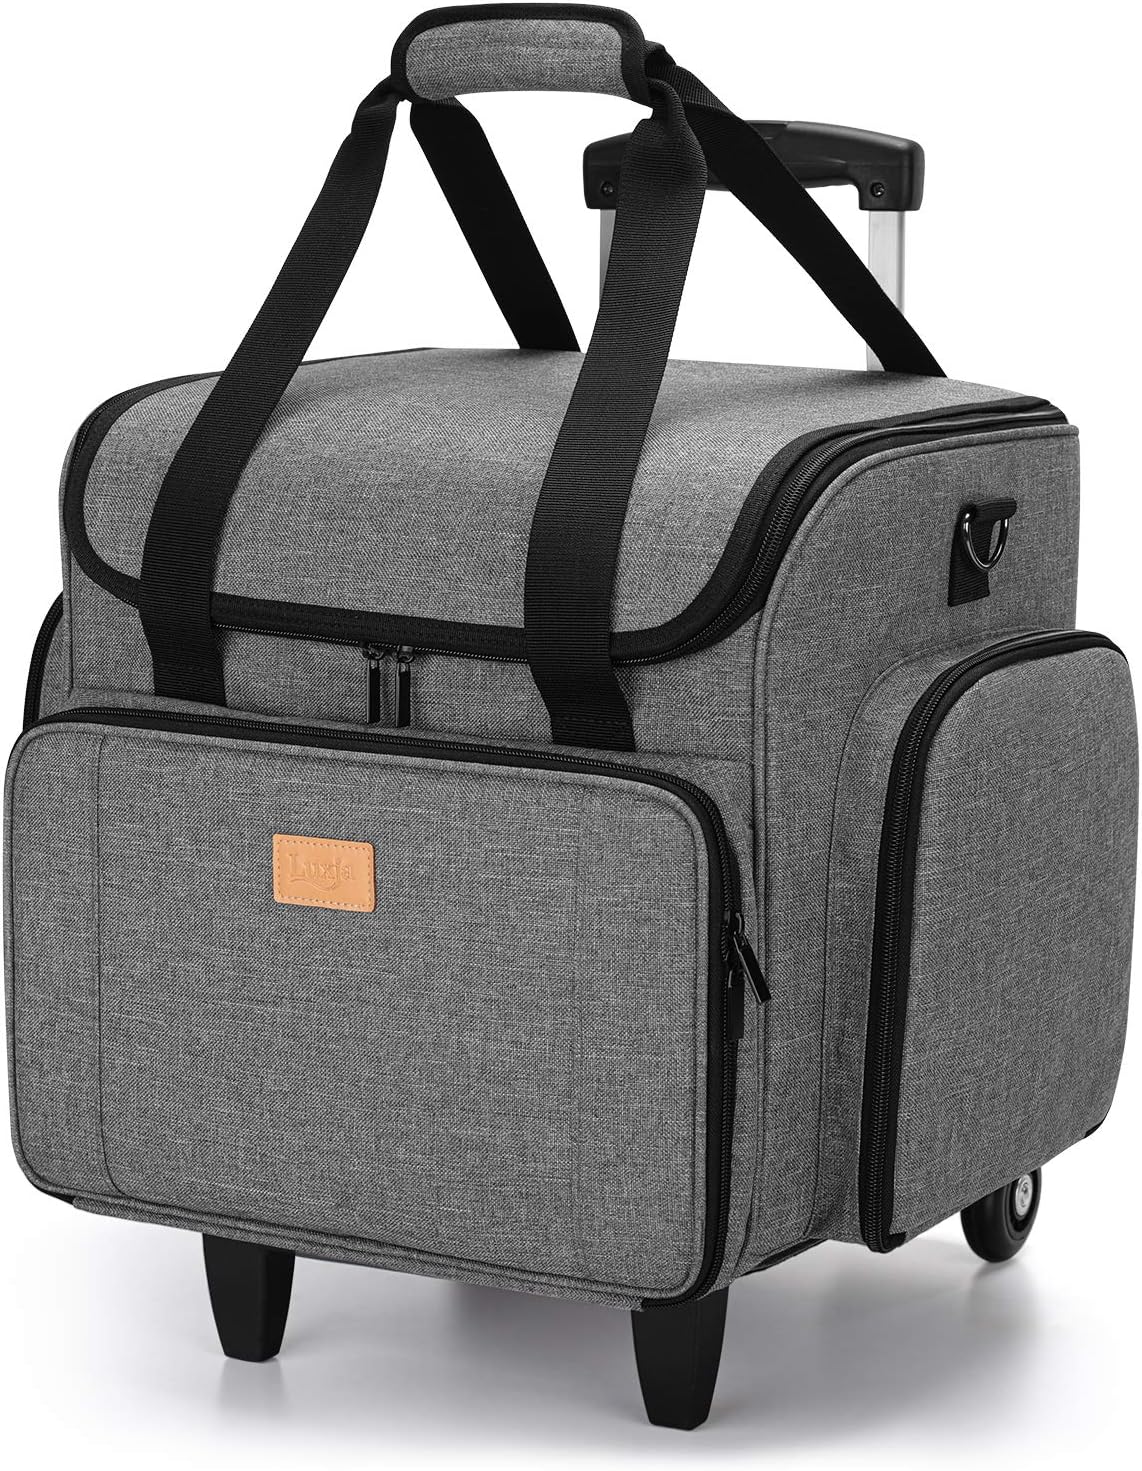 LUXJA Sewing Machine Case with Detachable Dolly, Sewing Machine Tote with Removable Bottom Pad (Patent Design), Gray